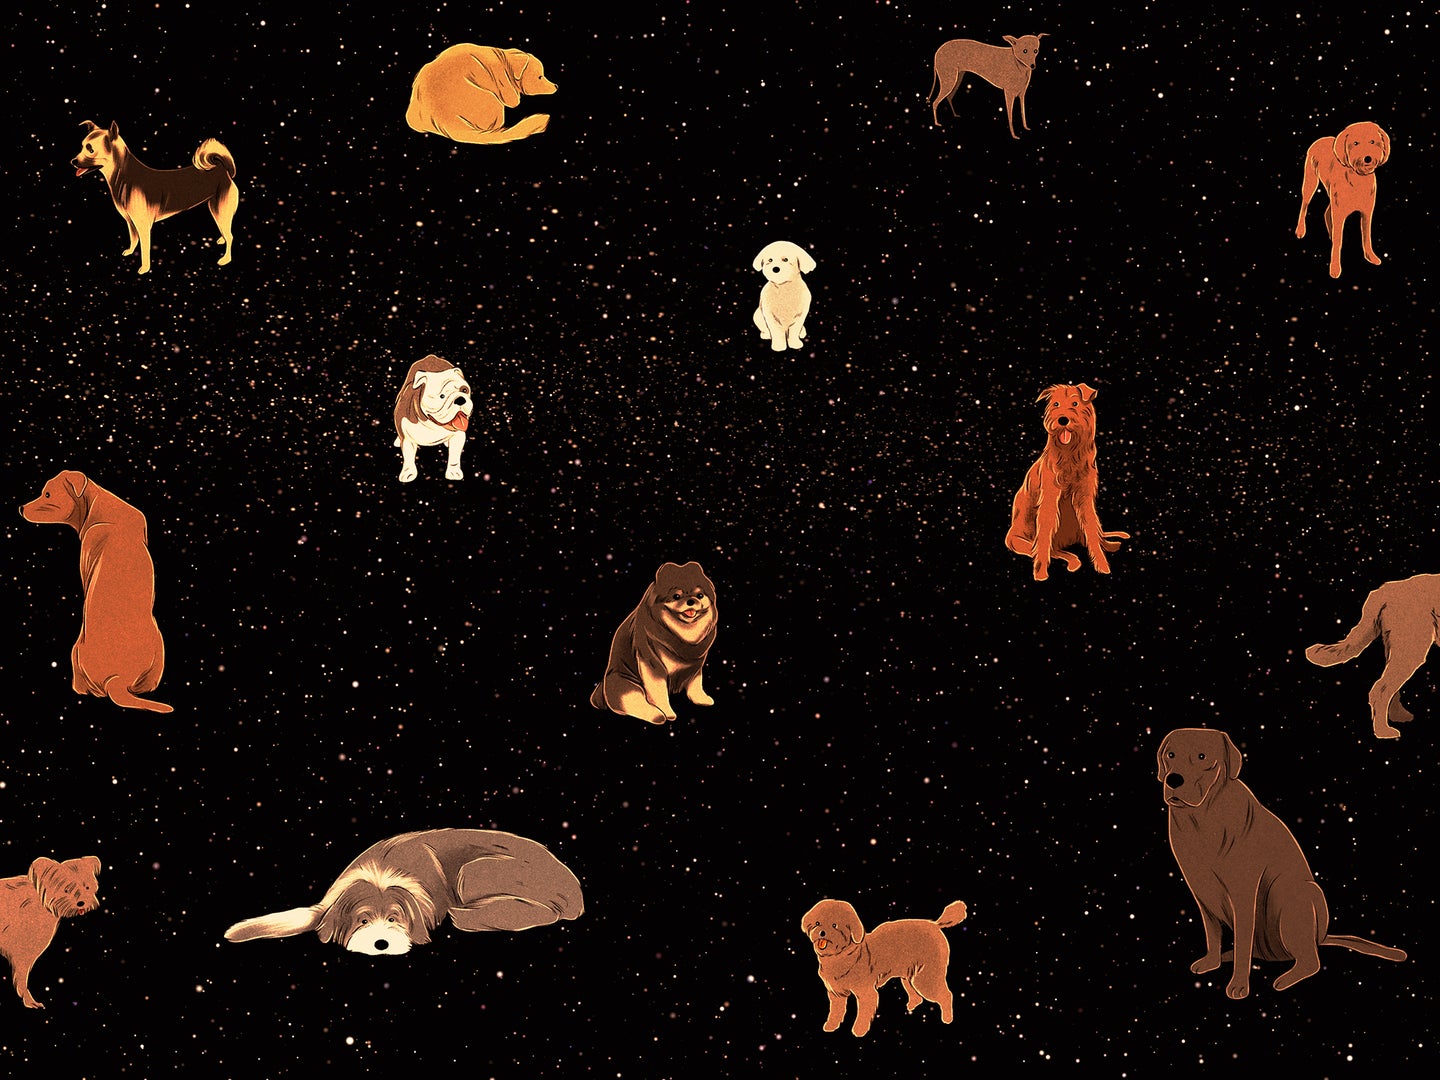 Shy dogs sitting apart on a black background in an illustration